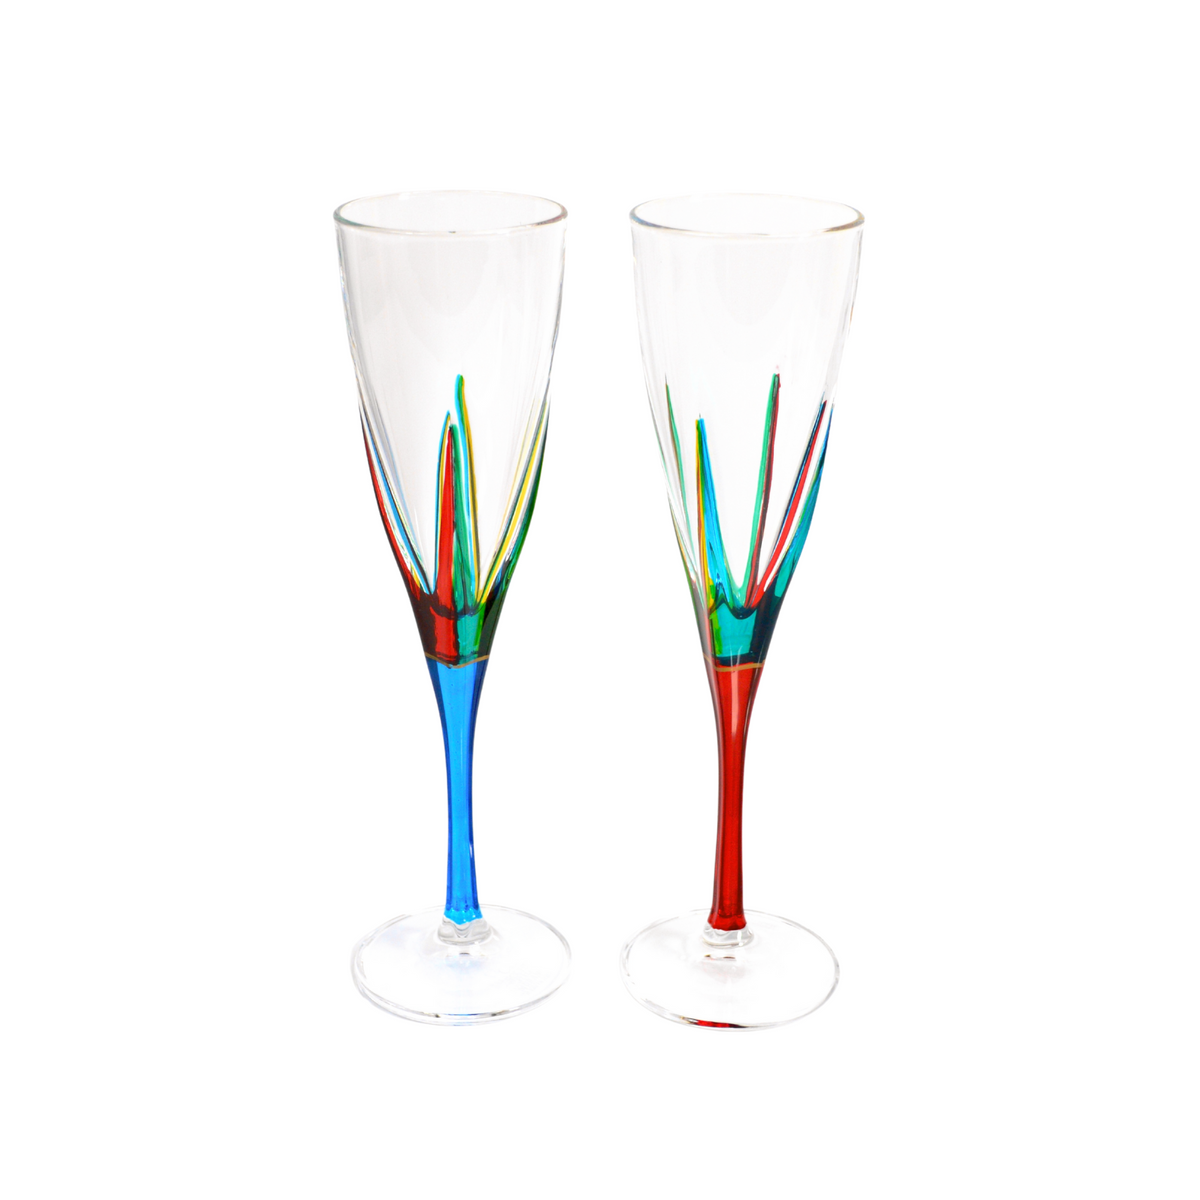 Fusion Champagne Flutes, Set of 2, Hand-Painted Italian Crystal Glasses - My Italian Decor